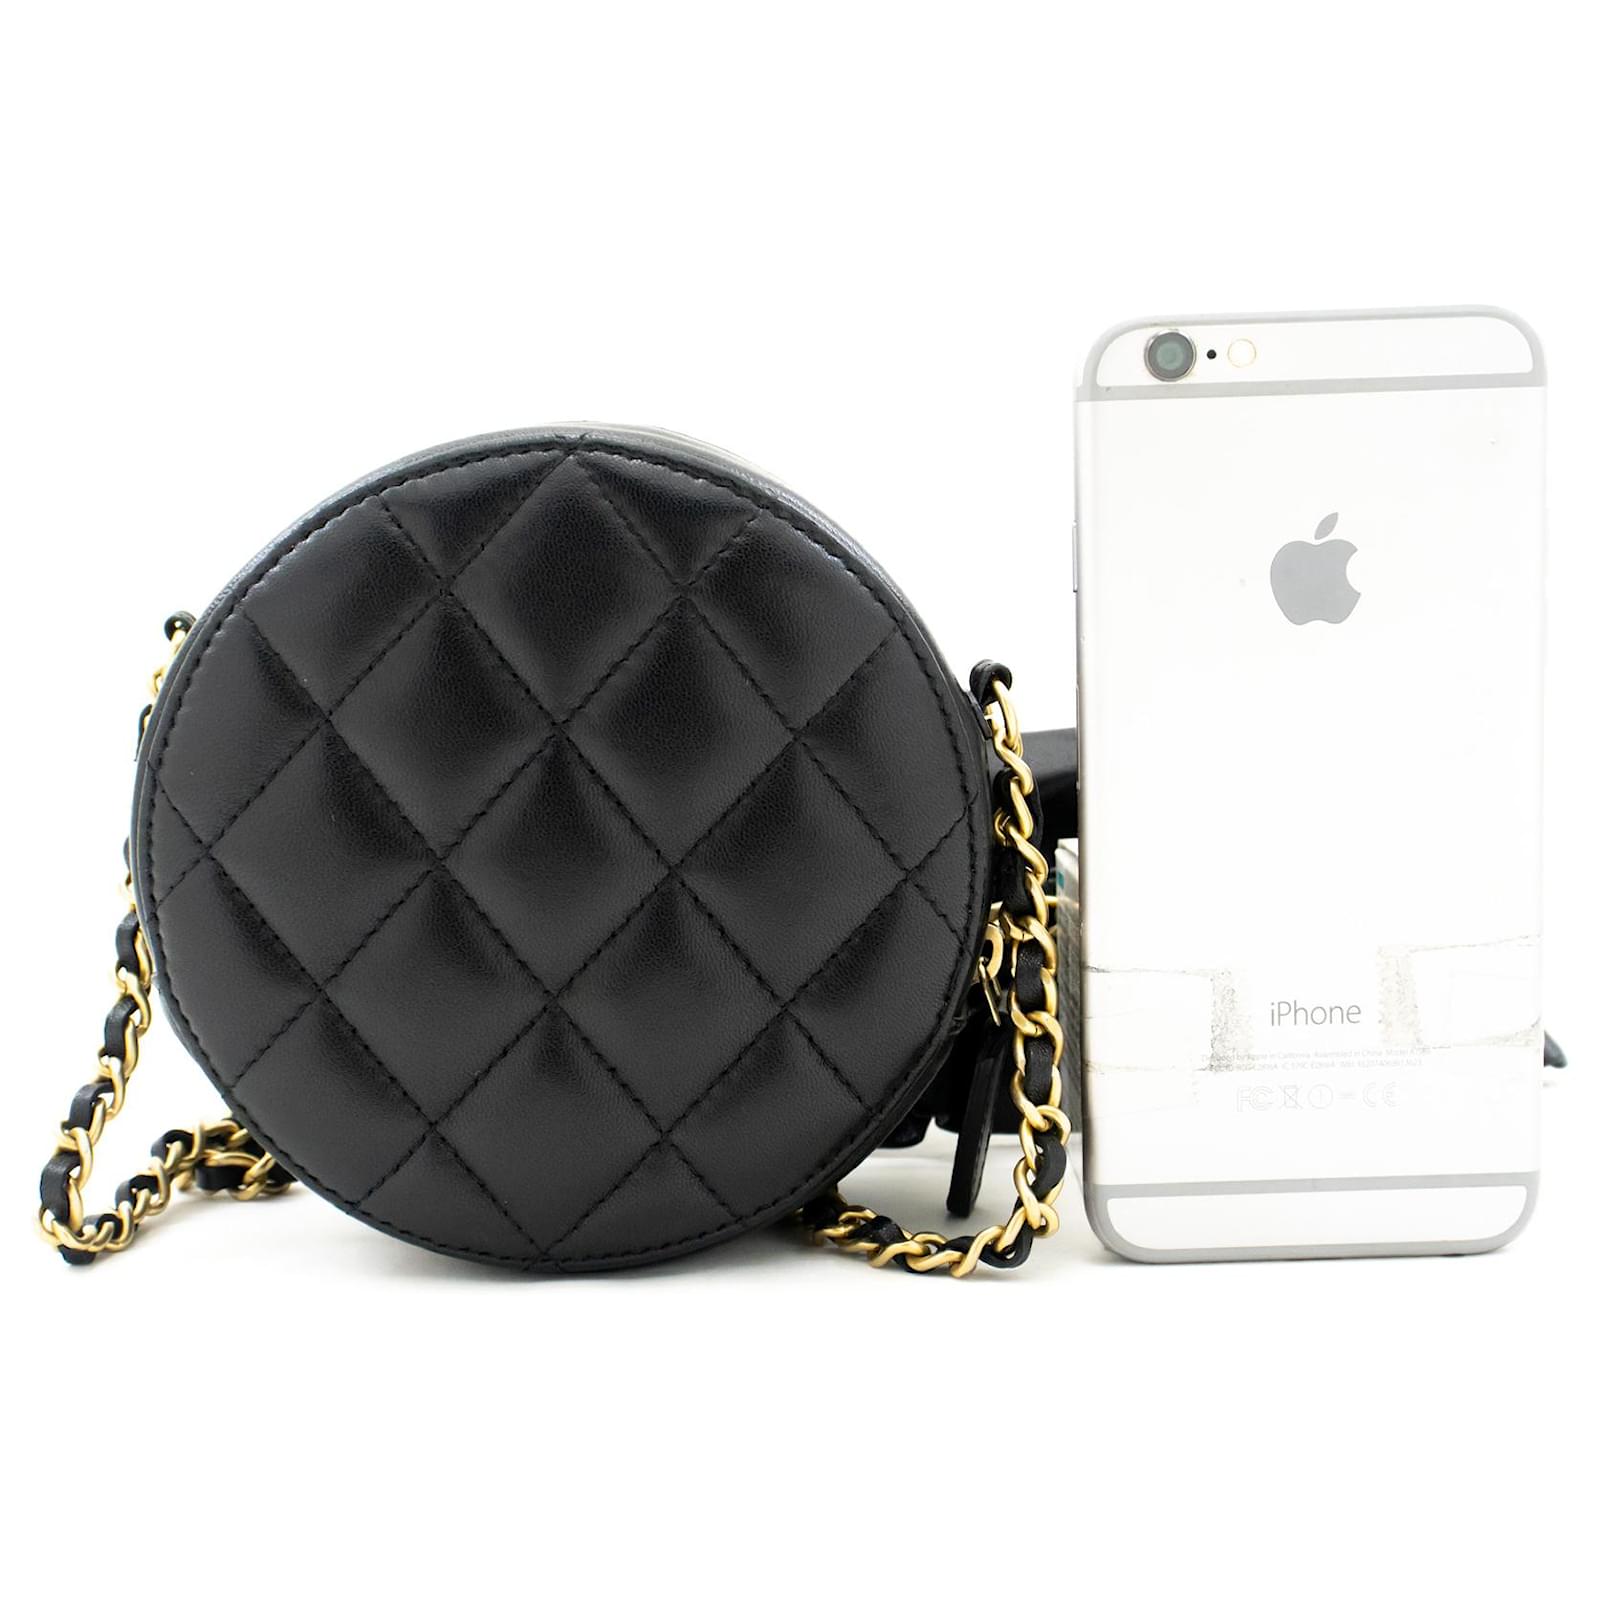 Handbags Chanel Chanel Round Zip Small Chain Shoulder Bag Black Quilted Lambskin